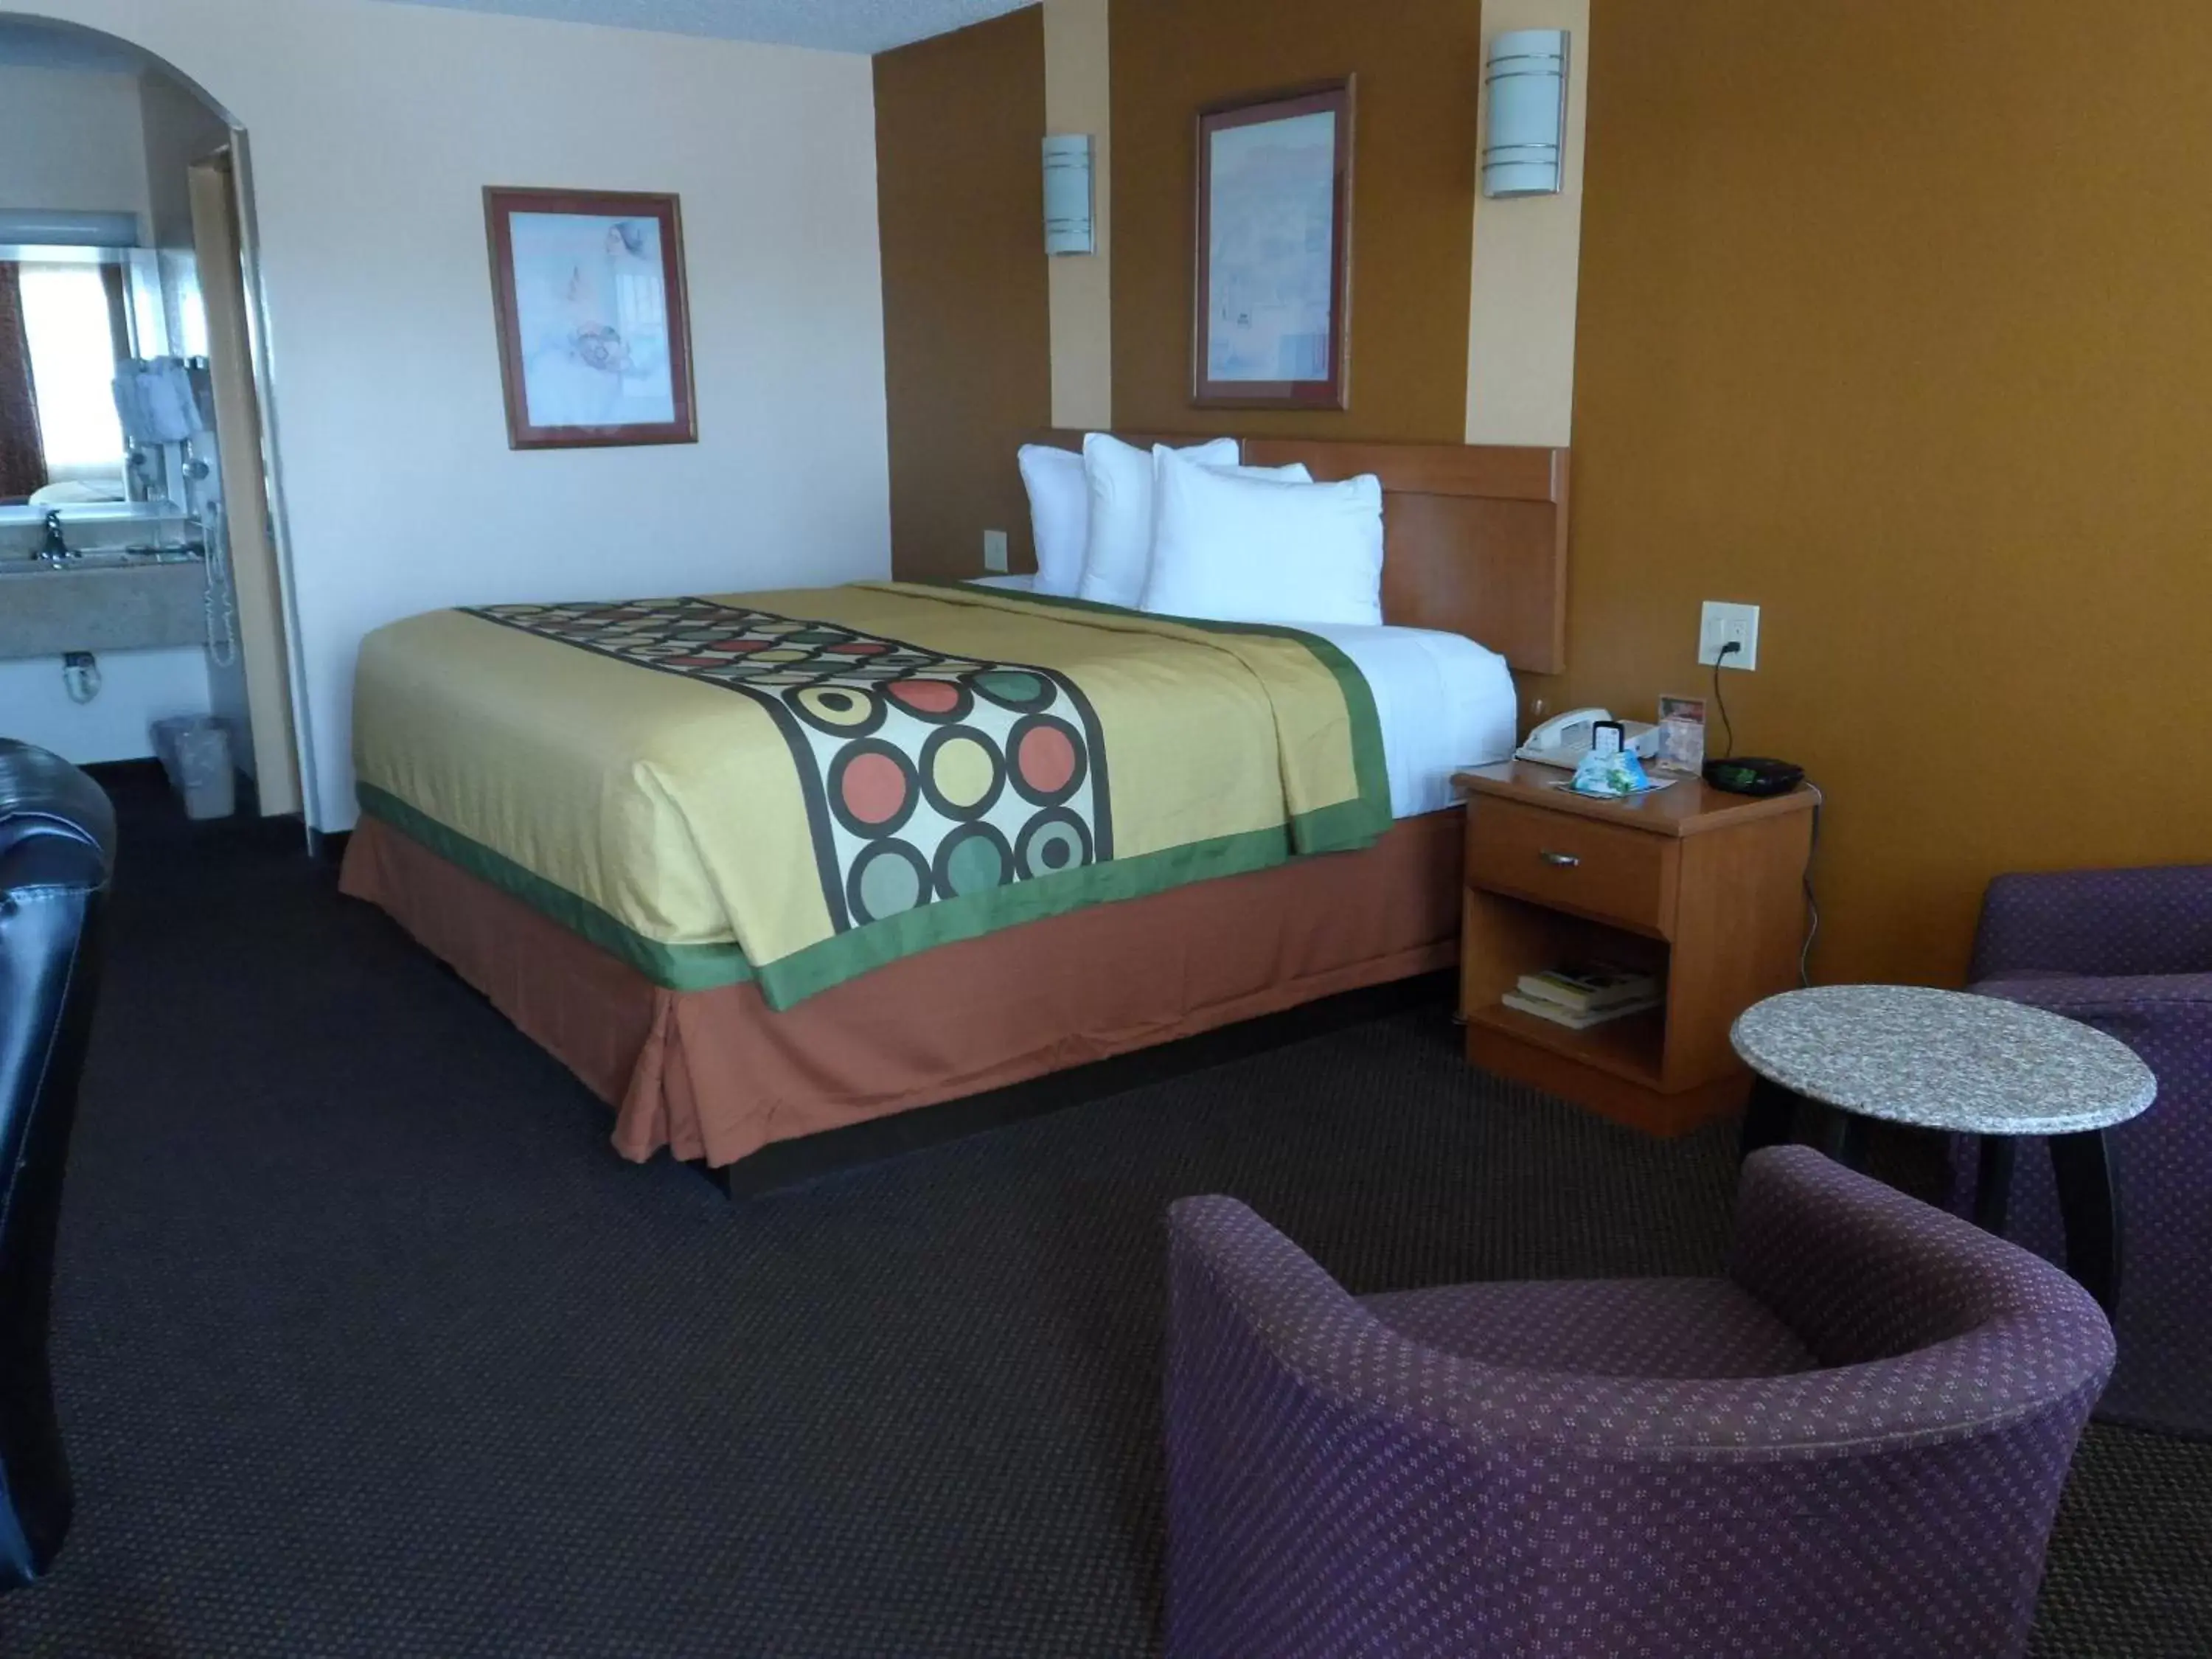 King Room - Non-Smoking in Super 8 by Wyndham Waco/Mall area TX